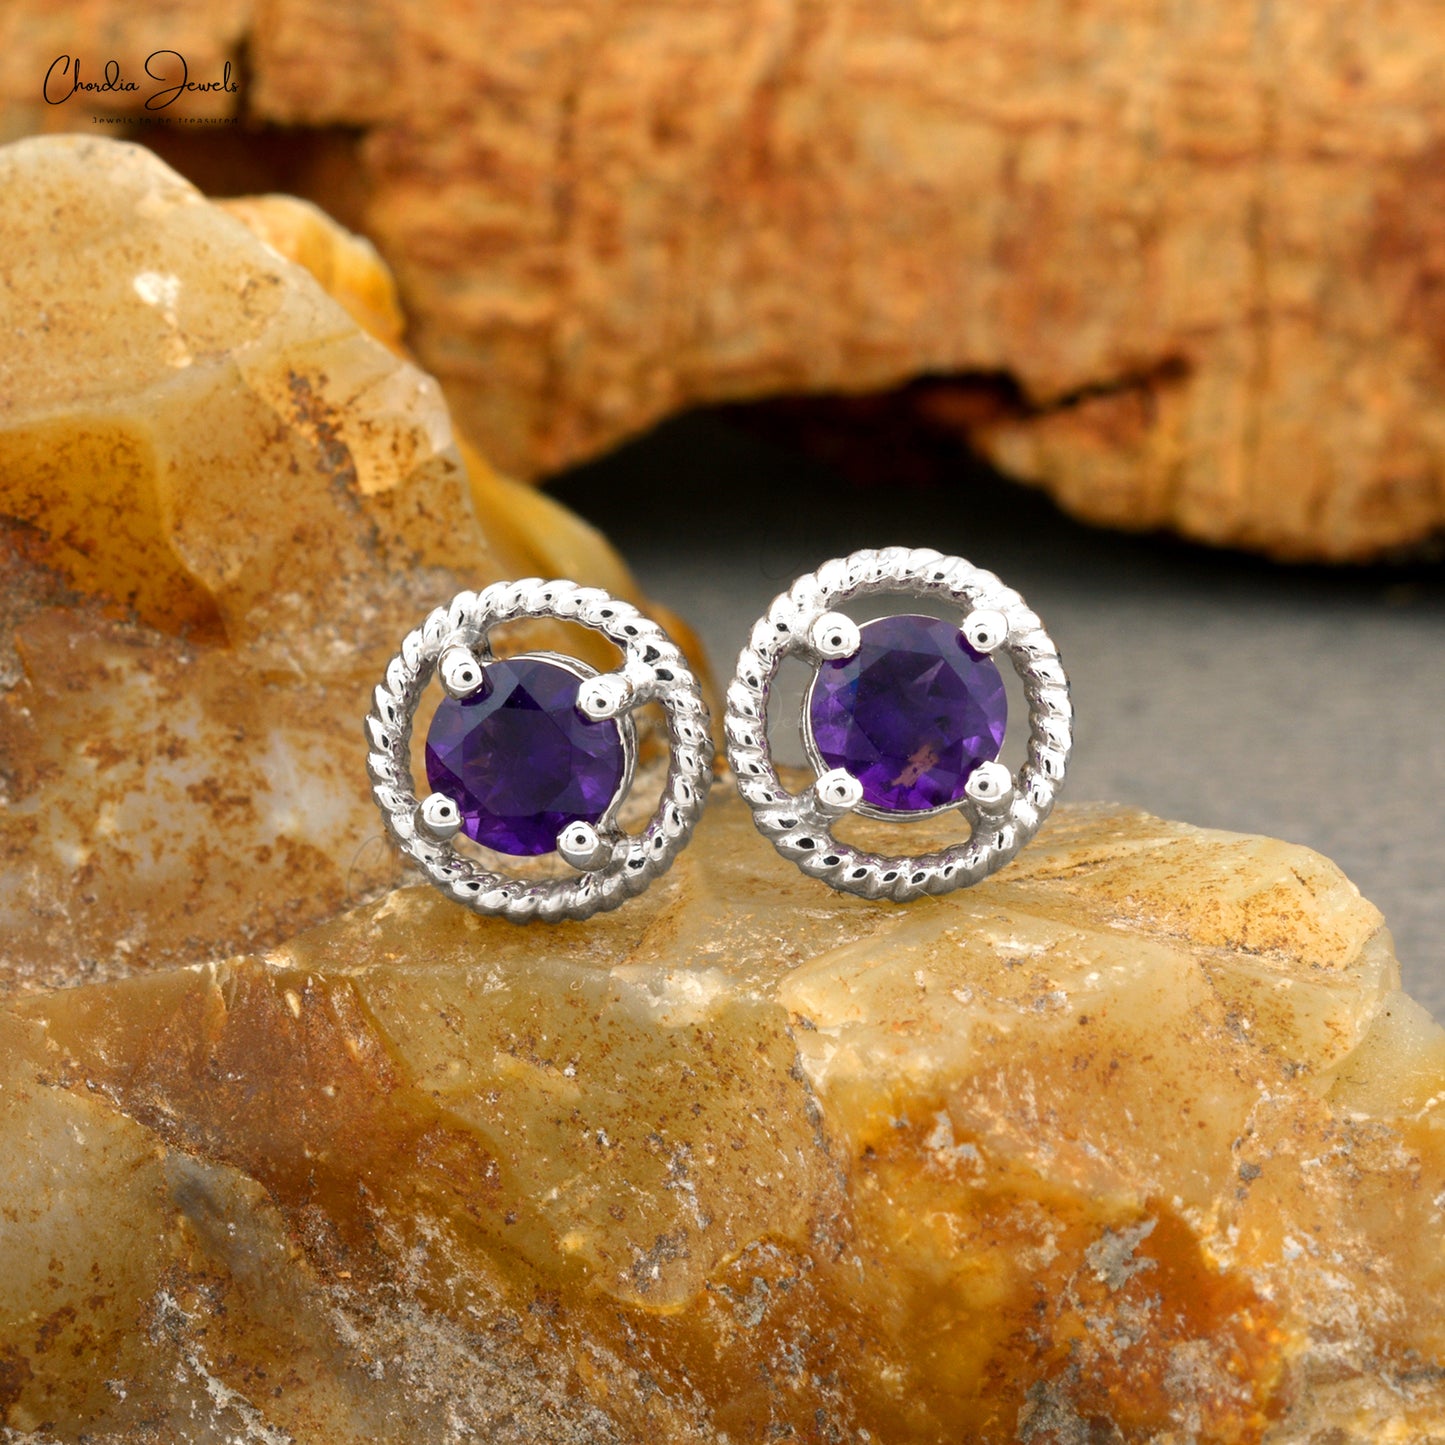 natural amethyst stud earrings in 14k white gold with 5mm round cut